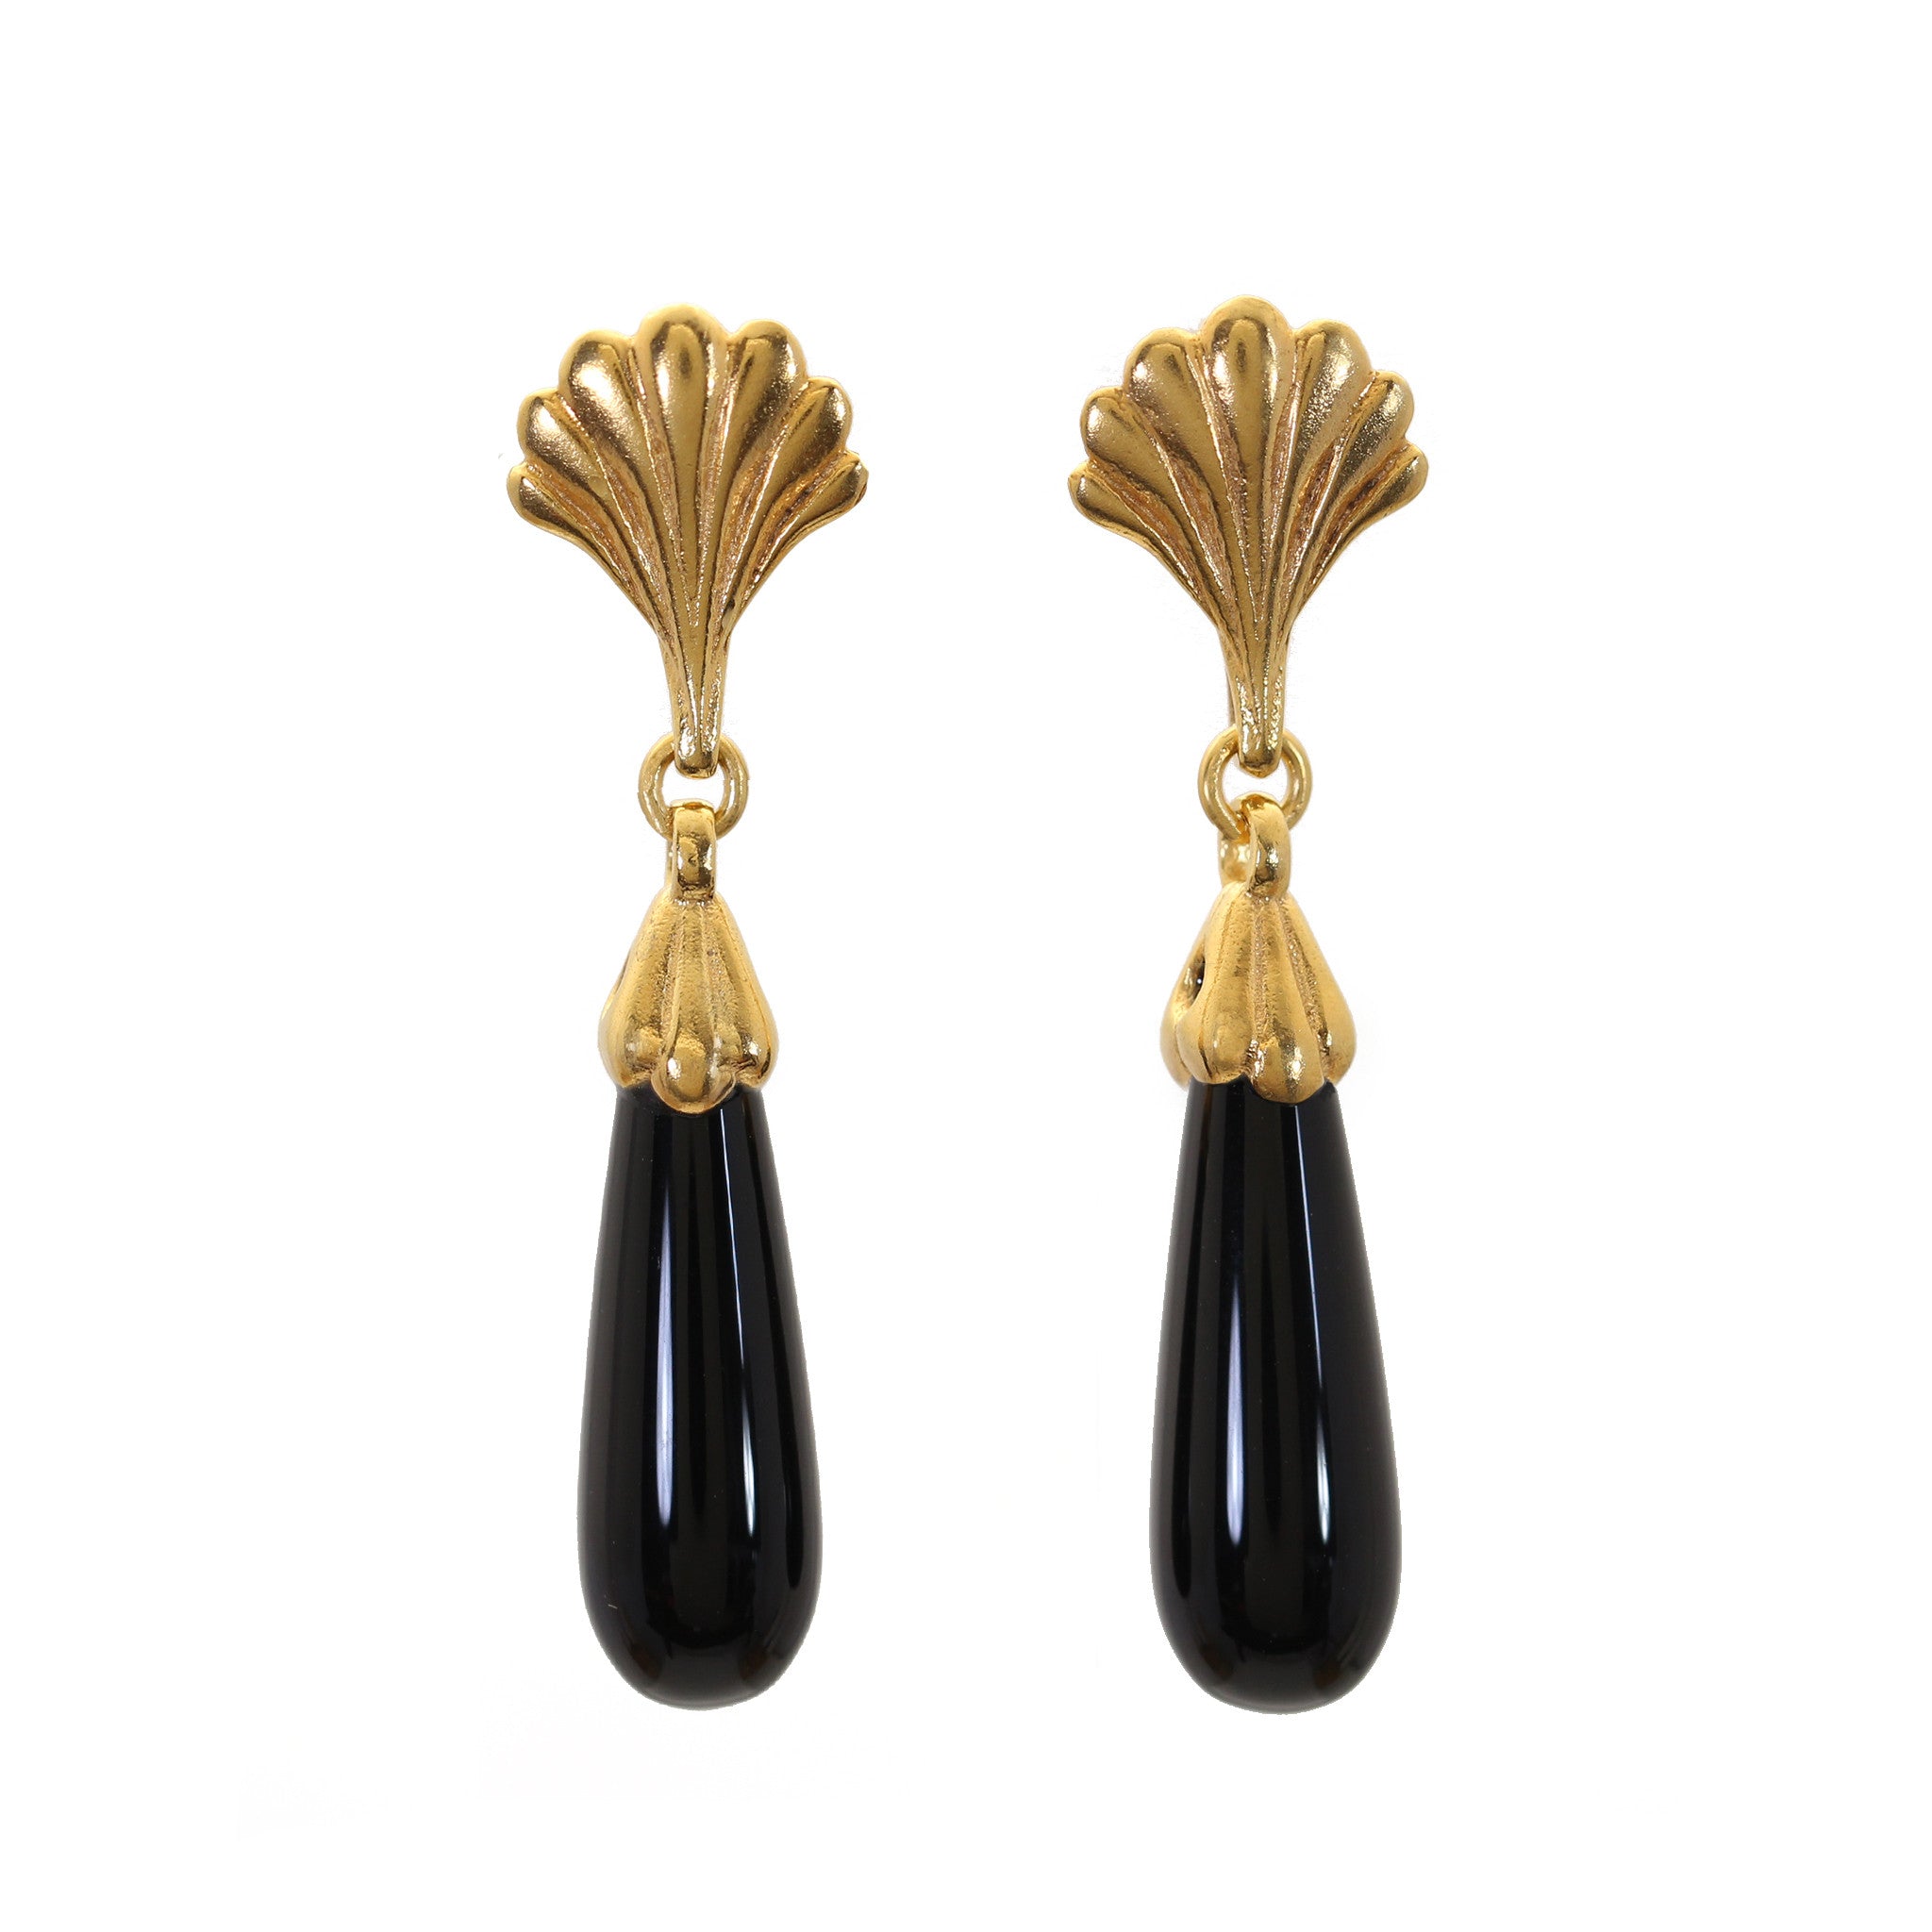 Yellow gold and jet black onyx earrings